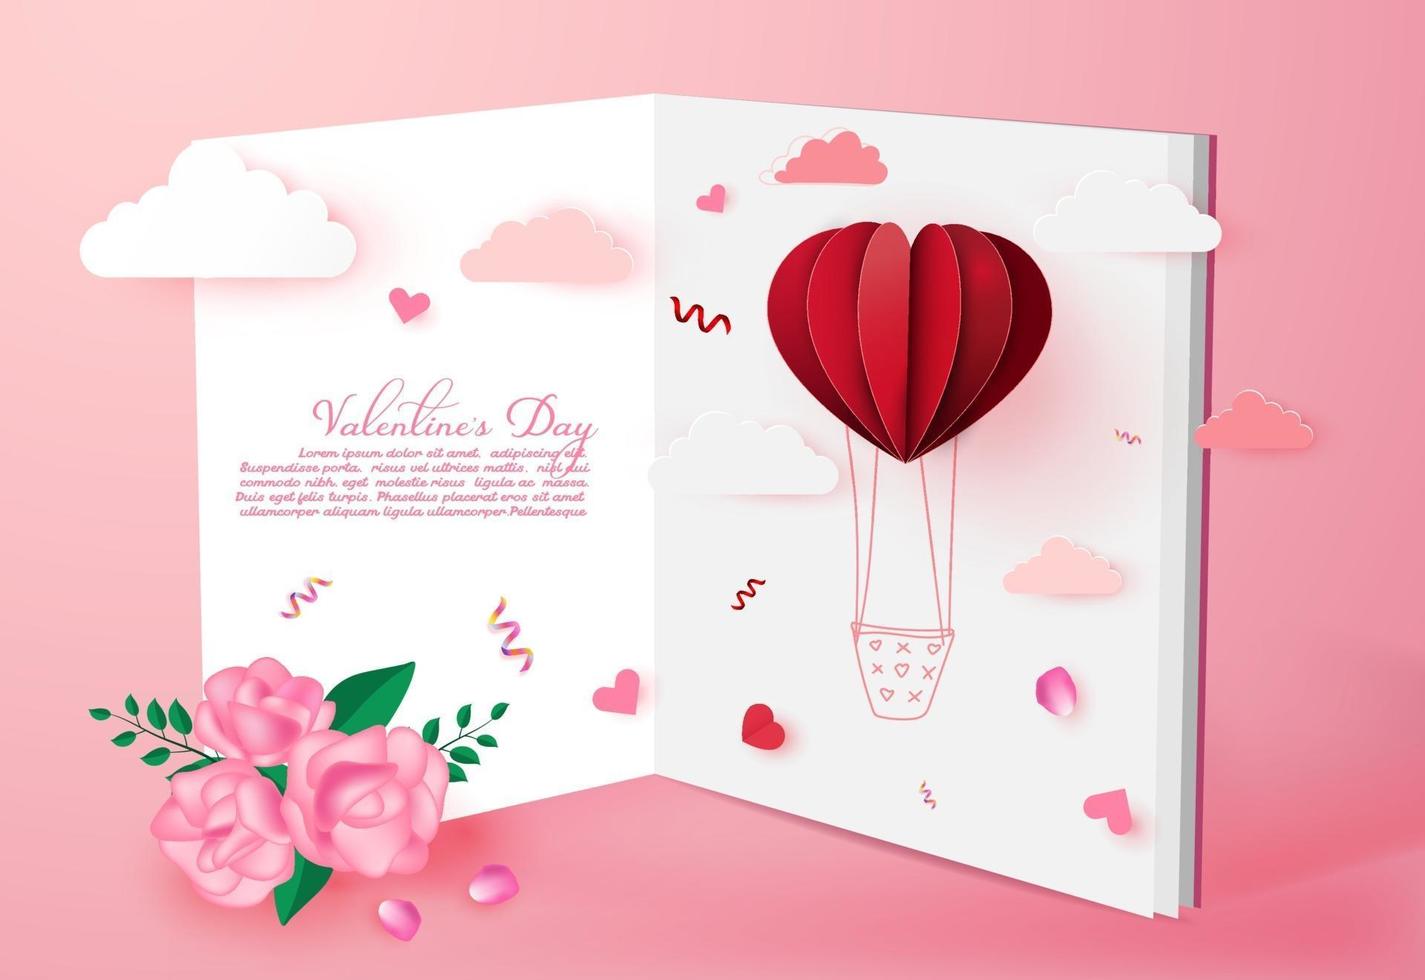 Valentine's Day Love invitation card background with origami heart shaped balloon on cloud.Paper art style. vector